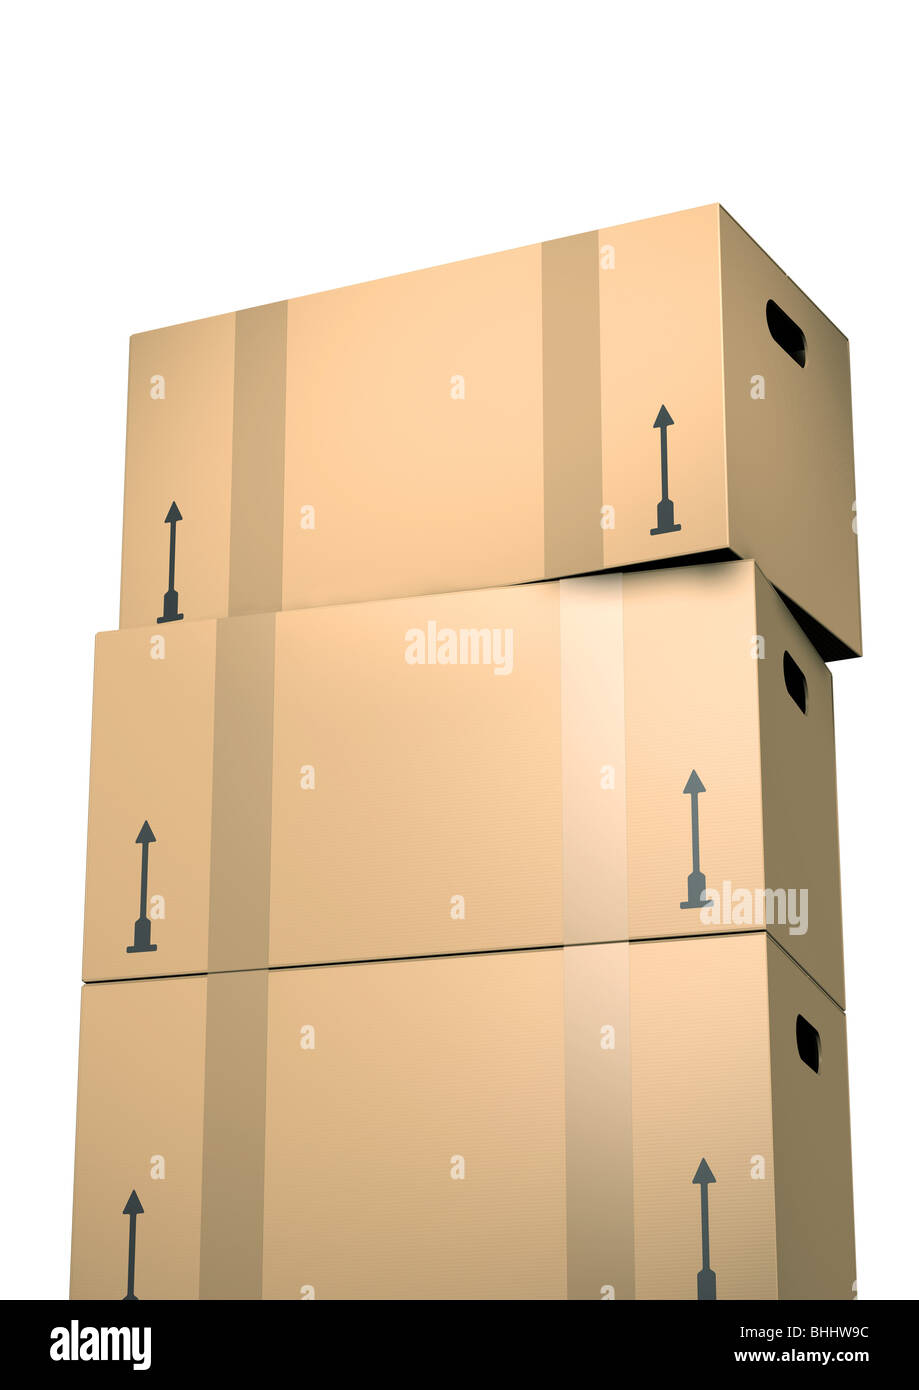 A Stack of Cardboard Boxes Stock Photo